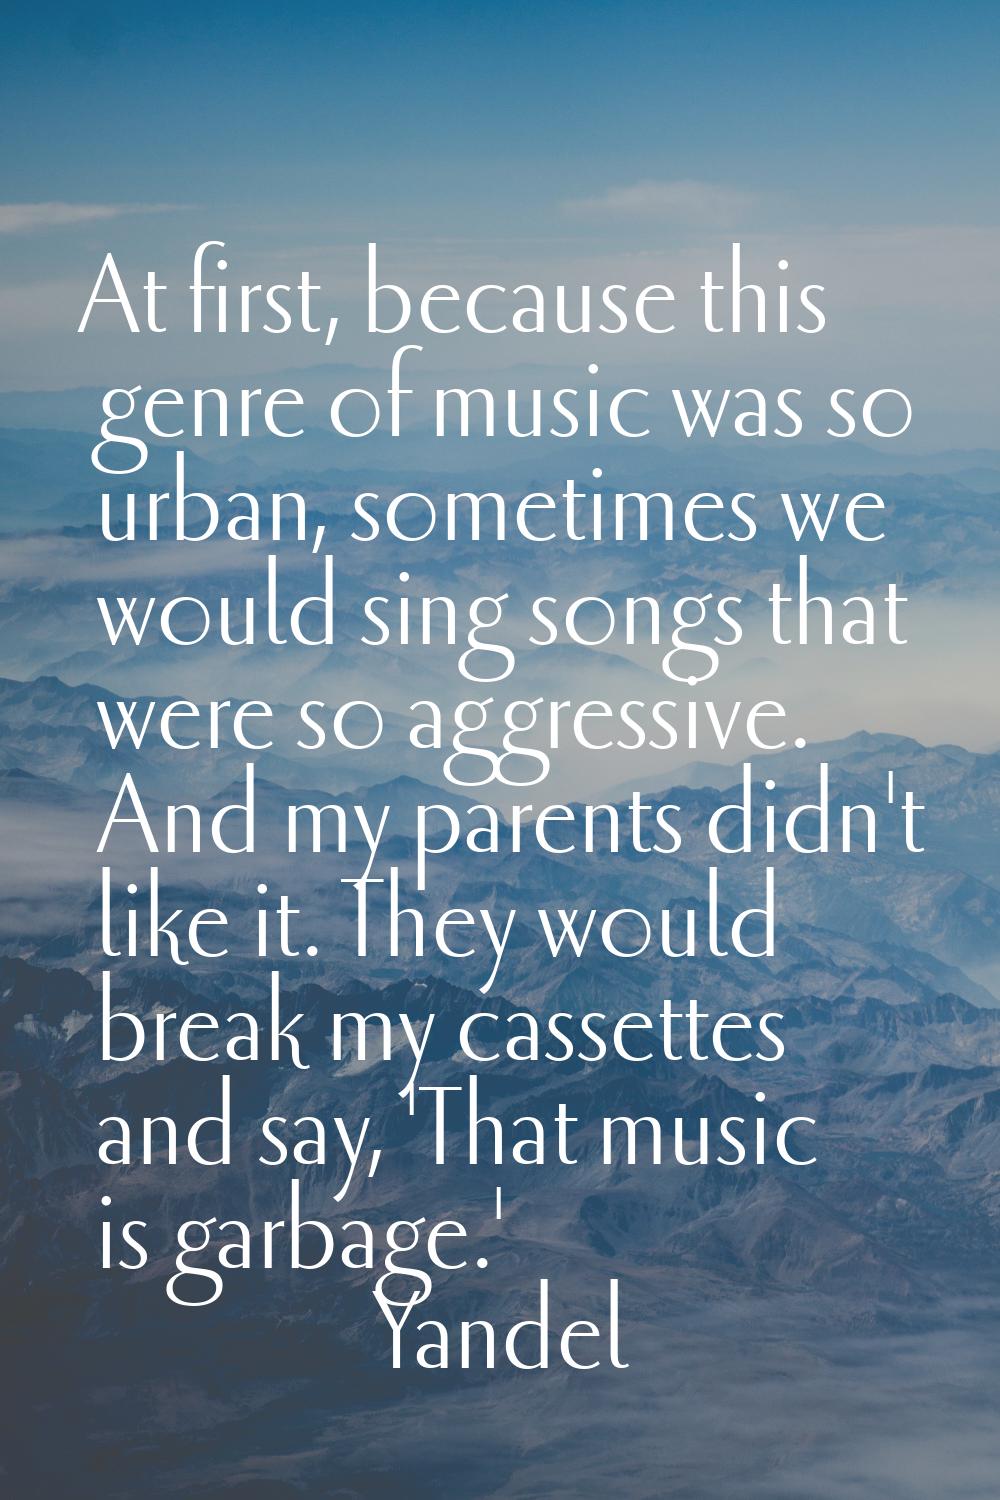 At first, because this genre of music was so urban, sometimes we would sing songs that were so aggr